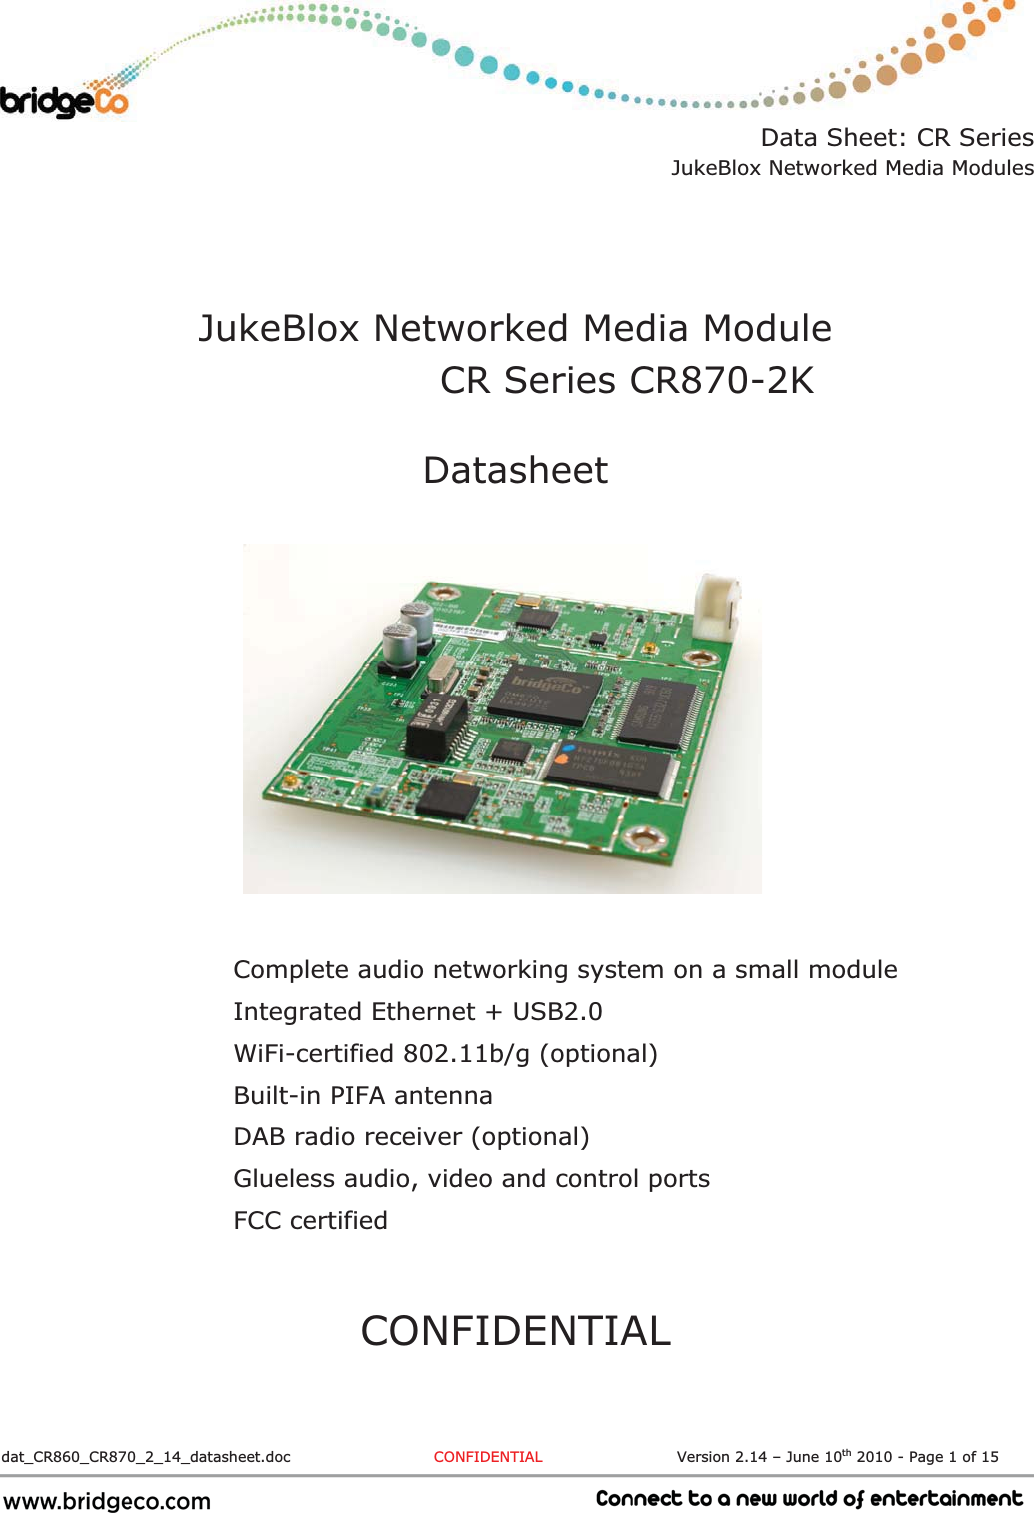 Data Sheet: CR Series JukeBlox Networked Media Modules  dat_CR860_CR870_2_14_datasheet.doc  CONFIDENTIAL                           Version 2.14 – June 10th 2010 - Page 1 of 15 JukeBlox Networked Media Module  CR Series CR870-2KDatasheetComplete audio networking system on a small module Integrated Ethernet + USB2.0 WiFi-certified 802.11b/g (optional) Built-in PIFA antenna DAB radio receiver (optional) Glueless audio, video and control ports FCC certified CONFIDENTIAL